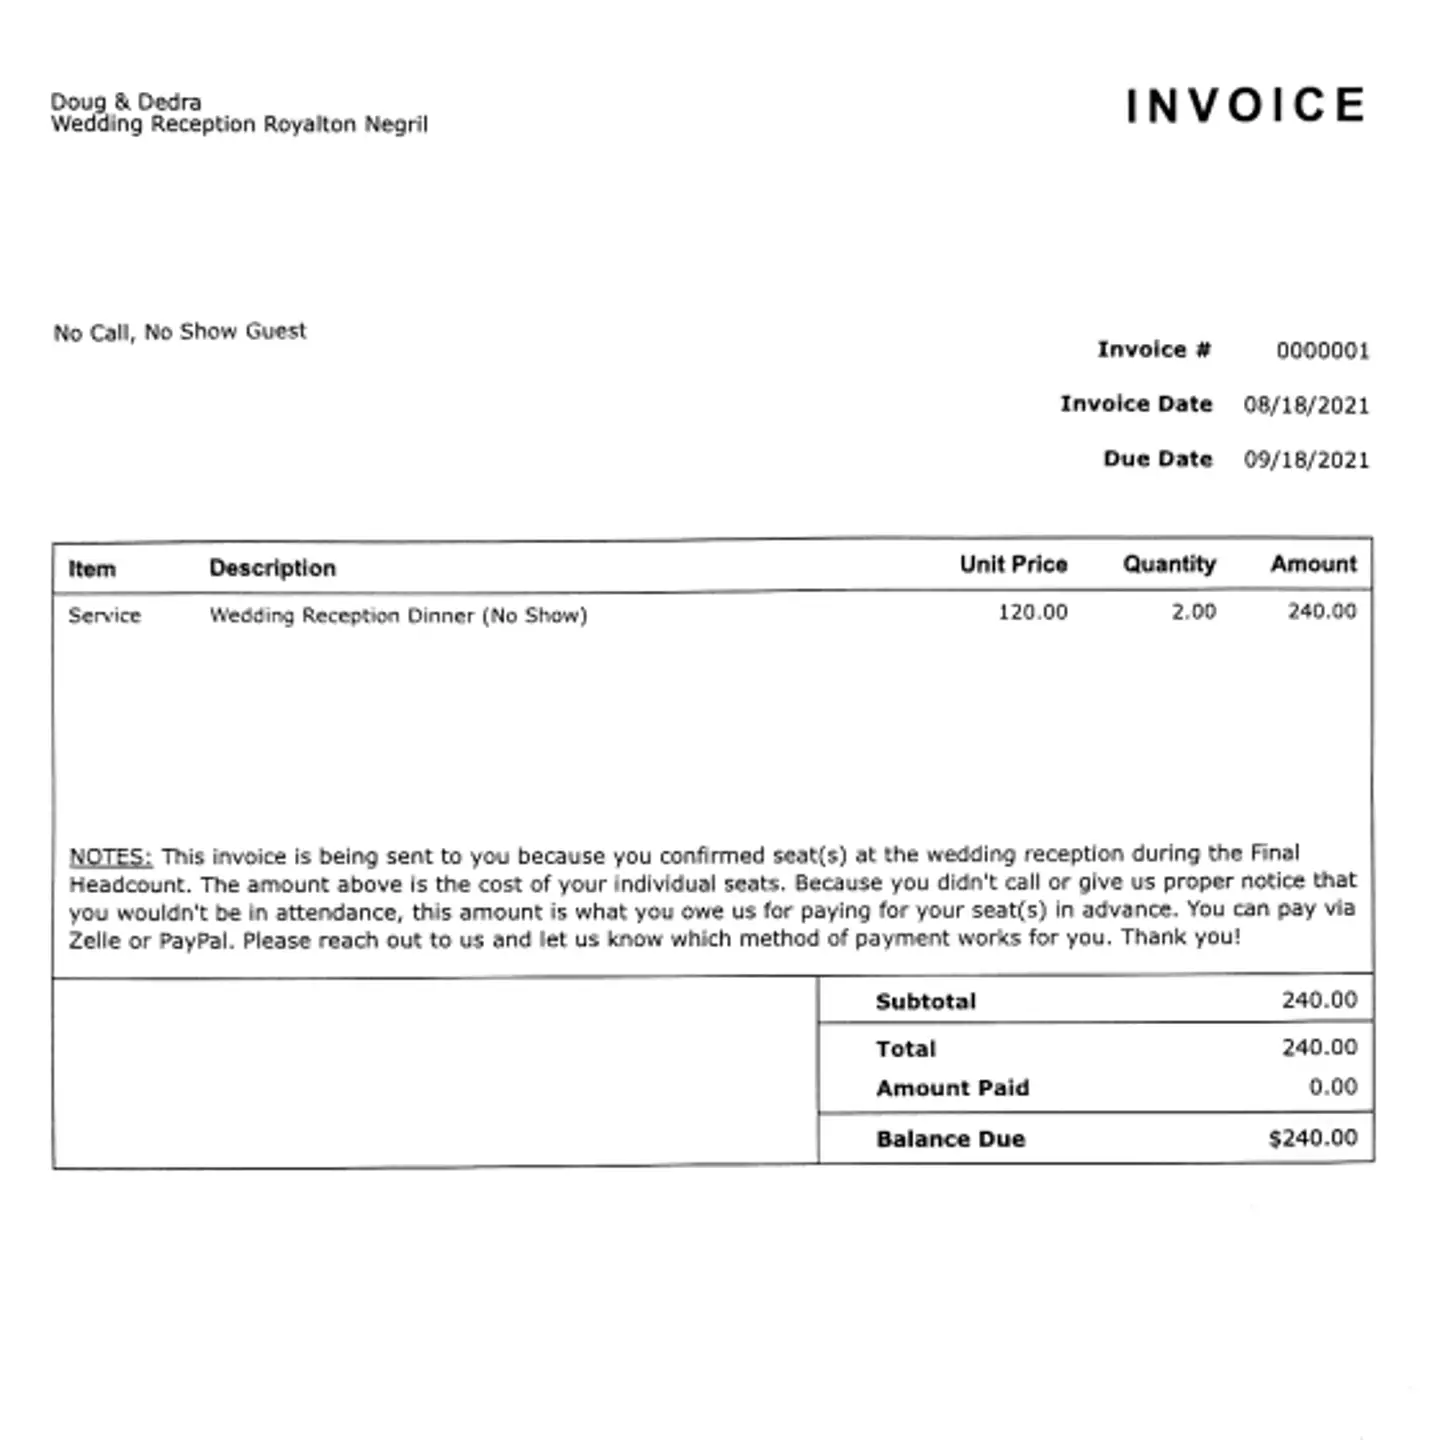 The invoice no-show guests received.